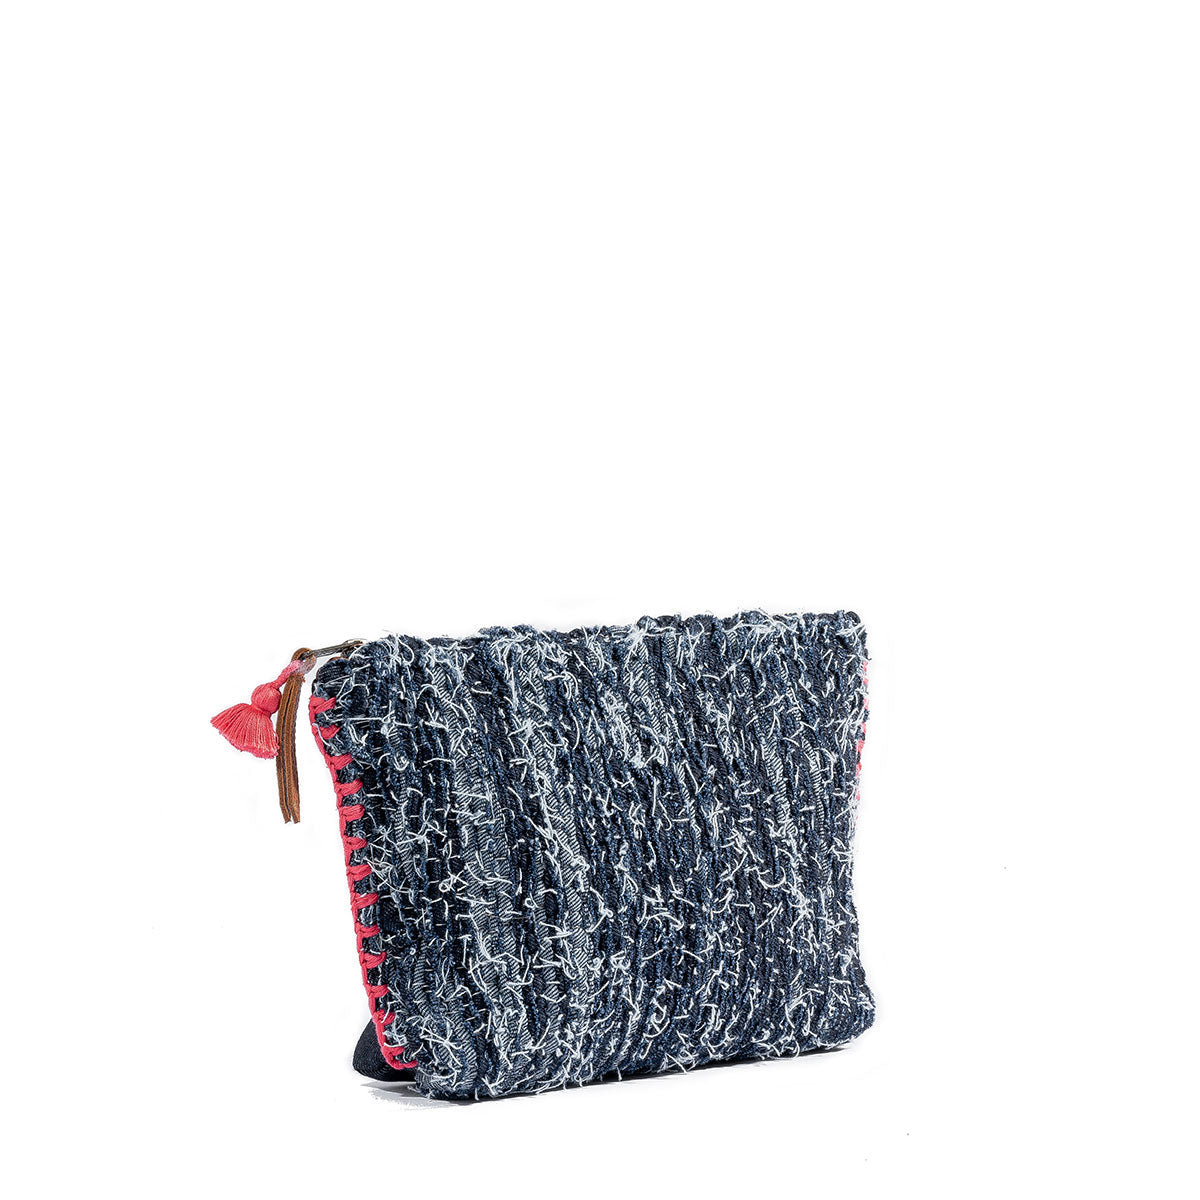 A side angle of the artisan hand woven Cristina Cosmetic Pouch in Denimology. The Cristina Pouch has strips of denim woven together with thick coral pink visible side stitches. It has a coral pink mini tassel and a leather zipper pull.